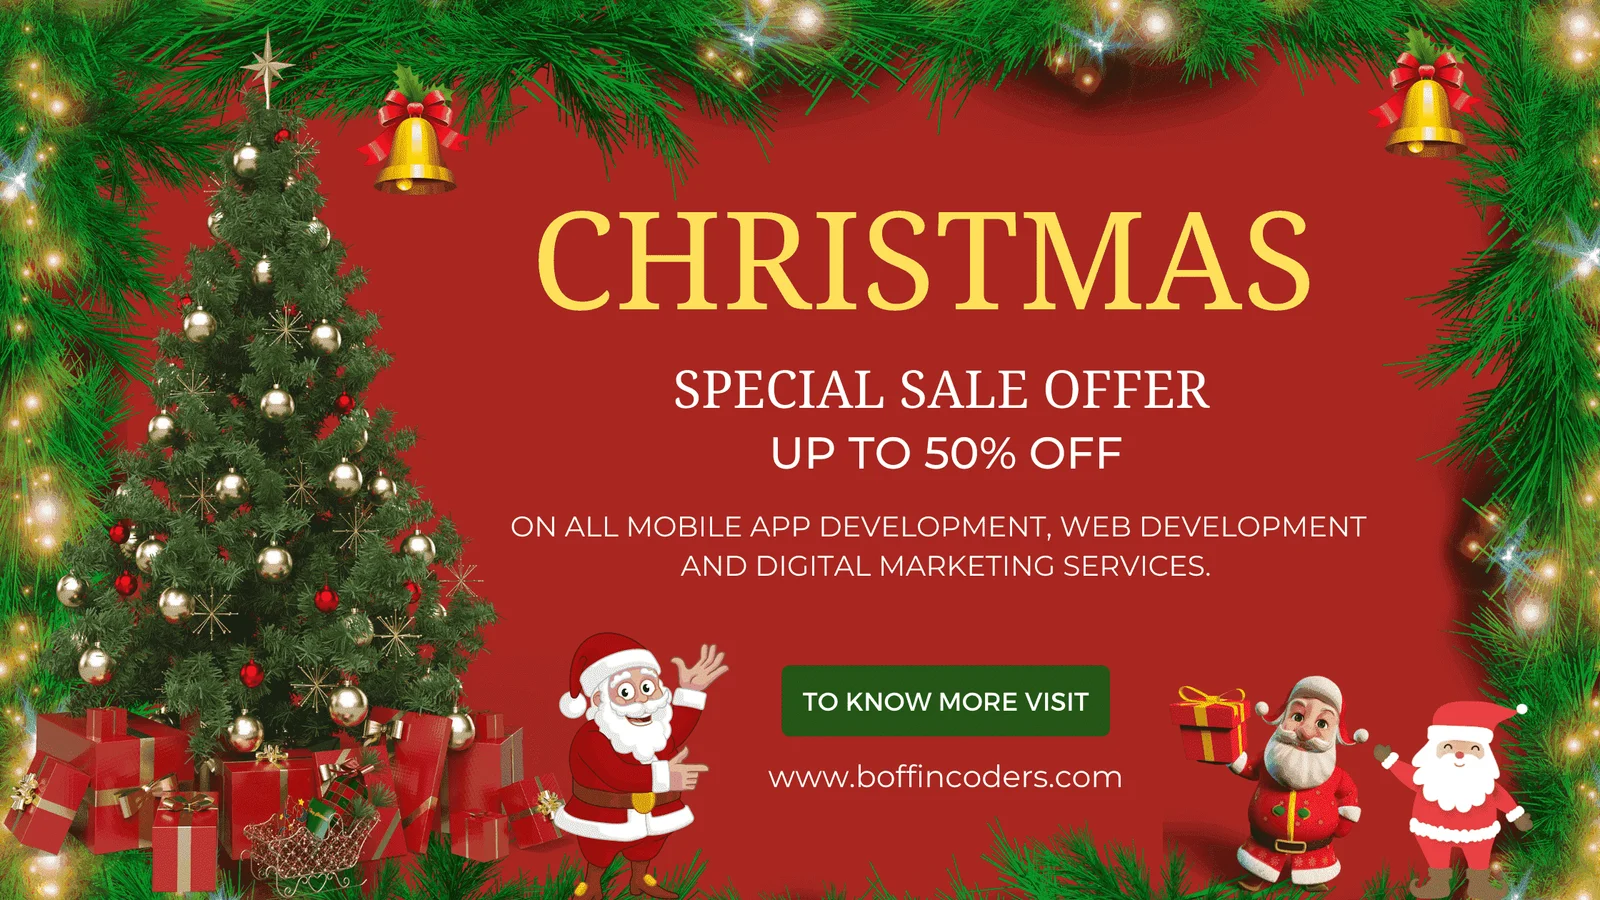 Grab the Best Offers and Deals on this Christmas at Boffin Coders